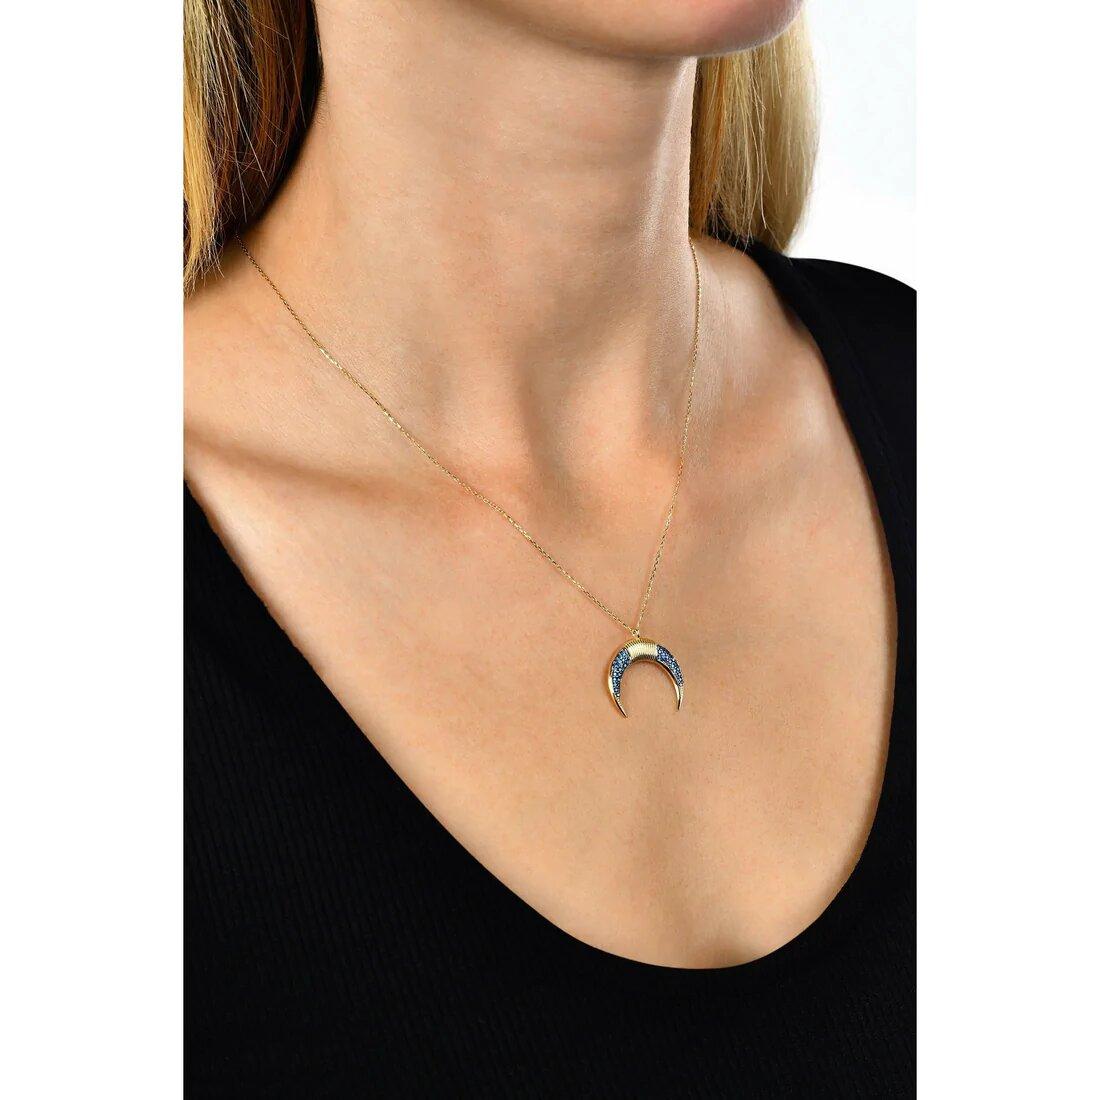 14k Solid Gold Horn Necklace, Gold Crescent Moon Pendant, 
Crescent Horn Necklace,  Upside Down Moon Pendant Gold, Tiny Horn Charm Necklace 

Total weight: 1.65 g.
Yellow 14k solid gold
Length: 45 sm.
Style: Minimalist
Gemstones: multicolor